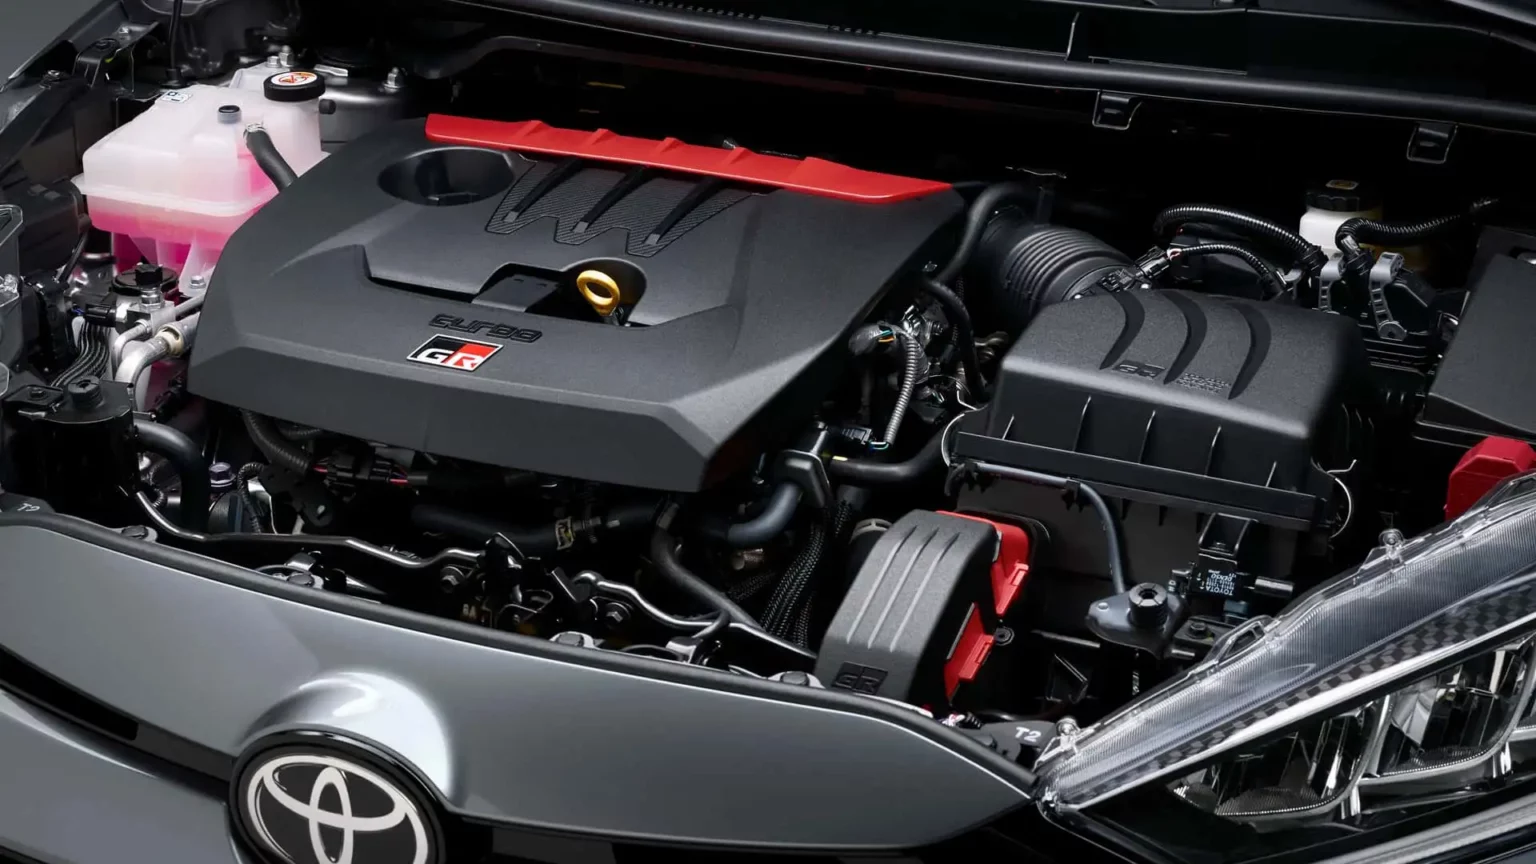 Toyota develops Combustion engine for future automotive use